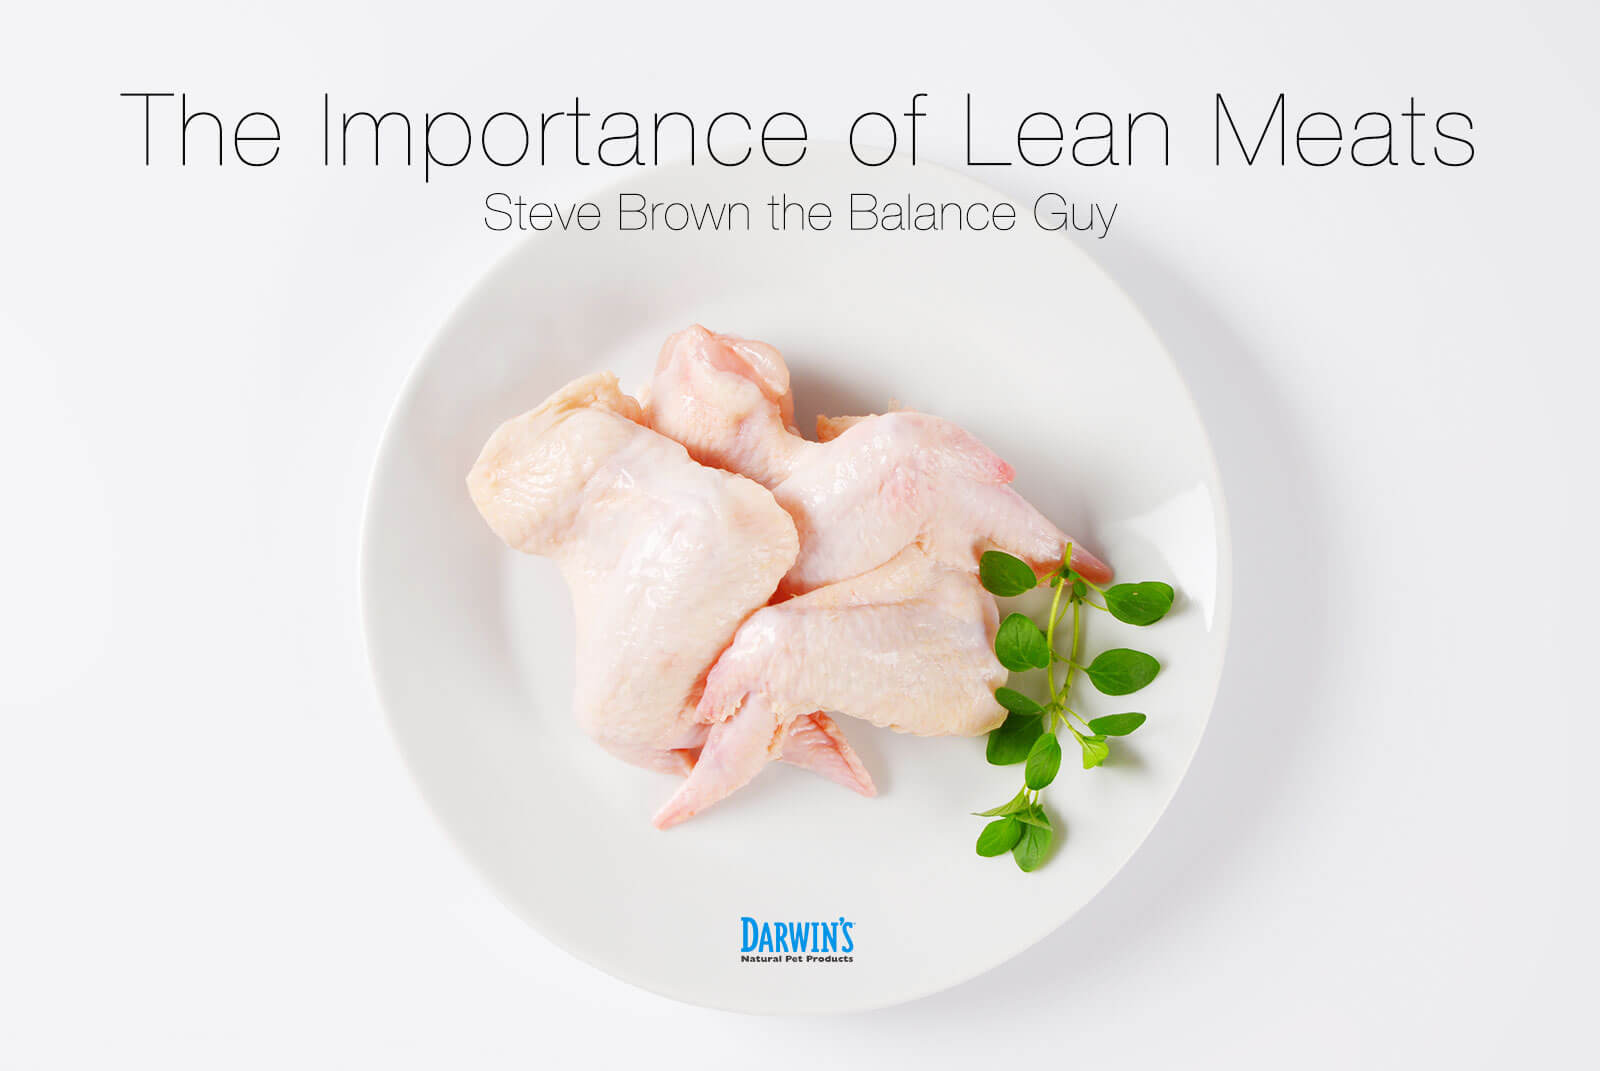 The Importance of Lean Meats In Raw Diets